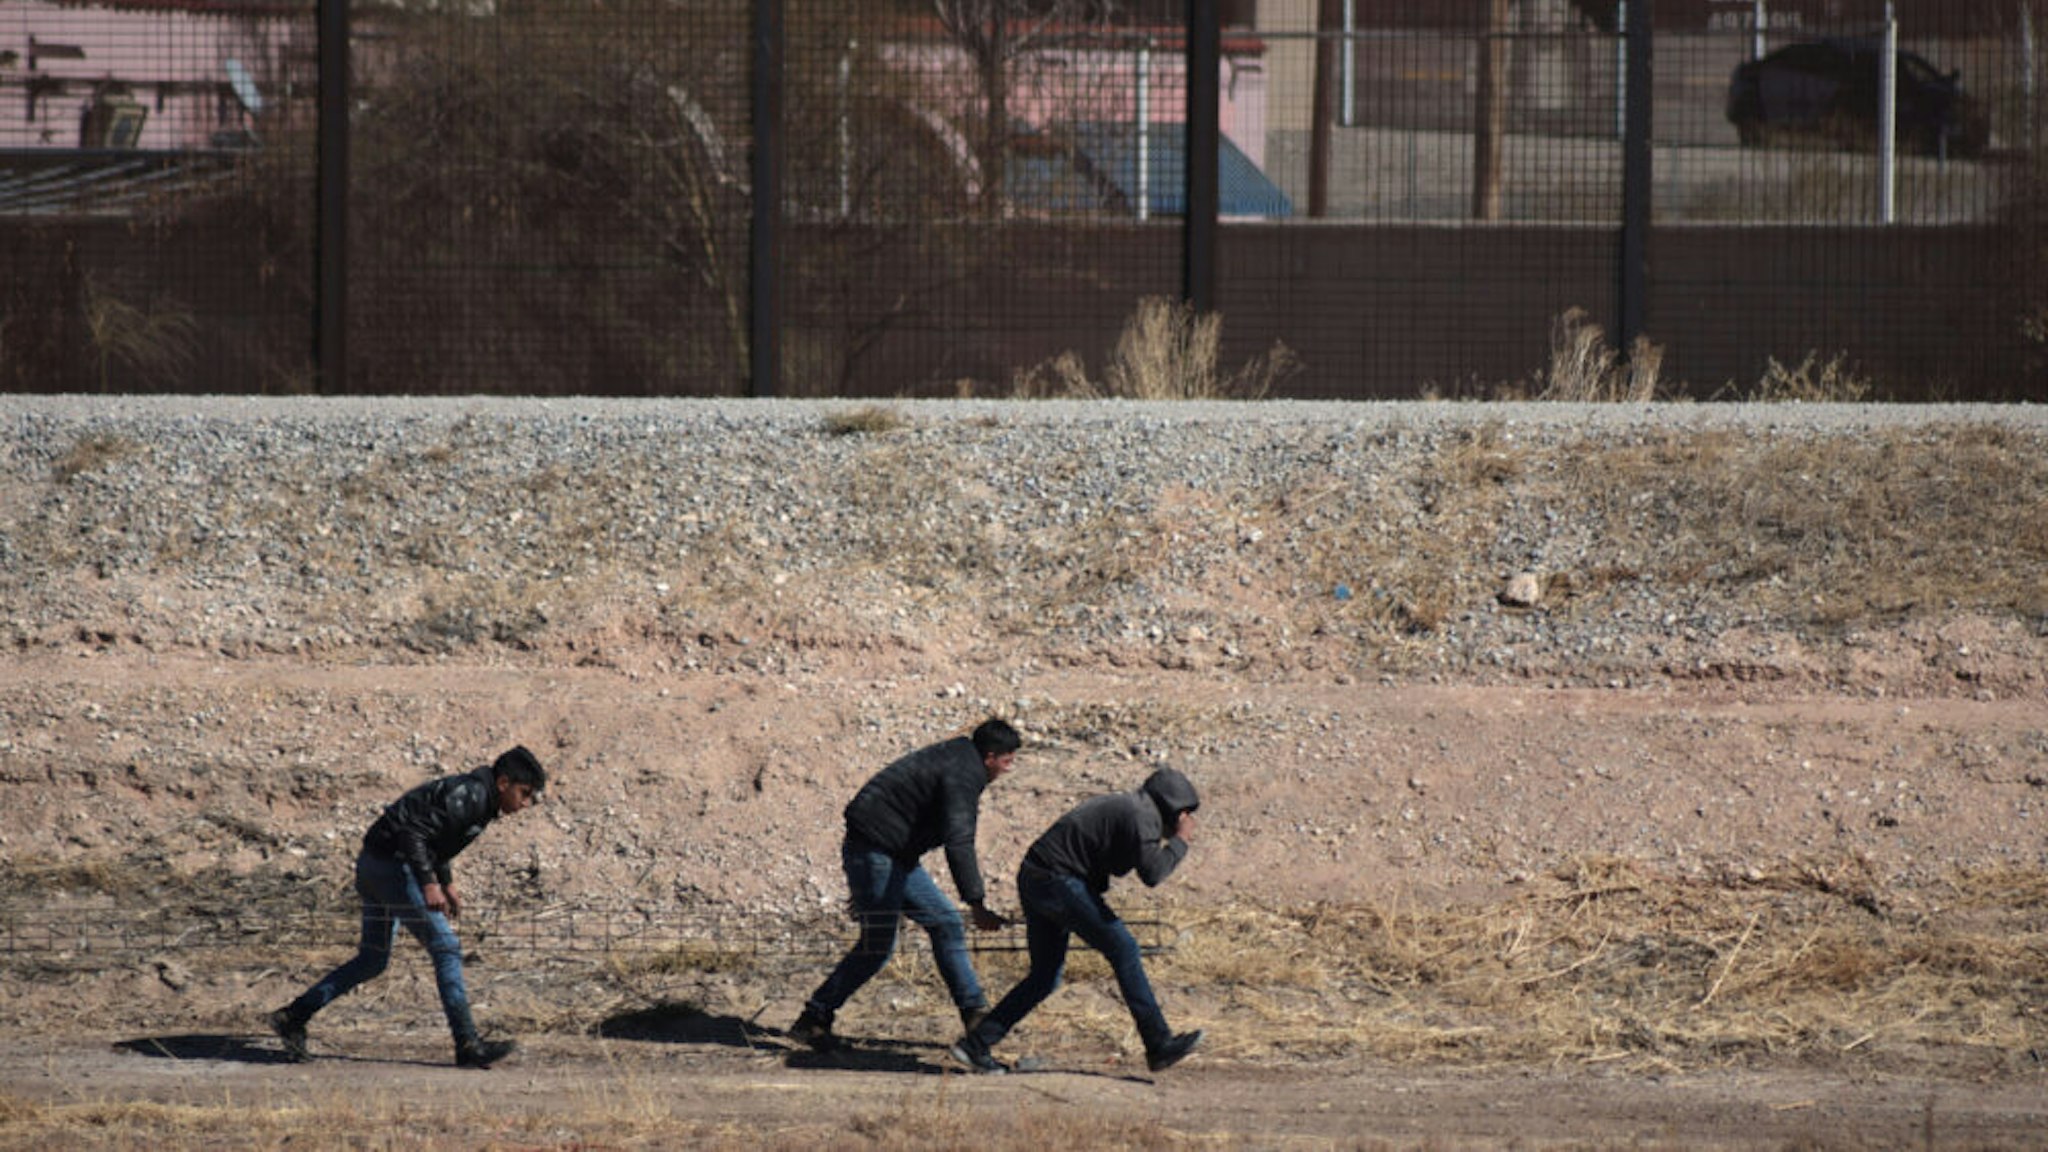 Three migrants tried to trick the border patrol to cross the border and reach the United States, but were detained by the agents in Juarez Chihuahua, Mexico, on 22 January 2021.